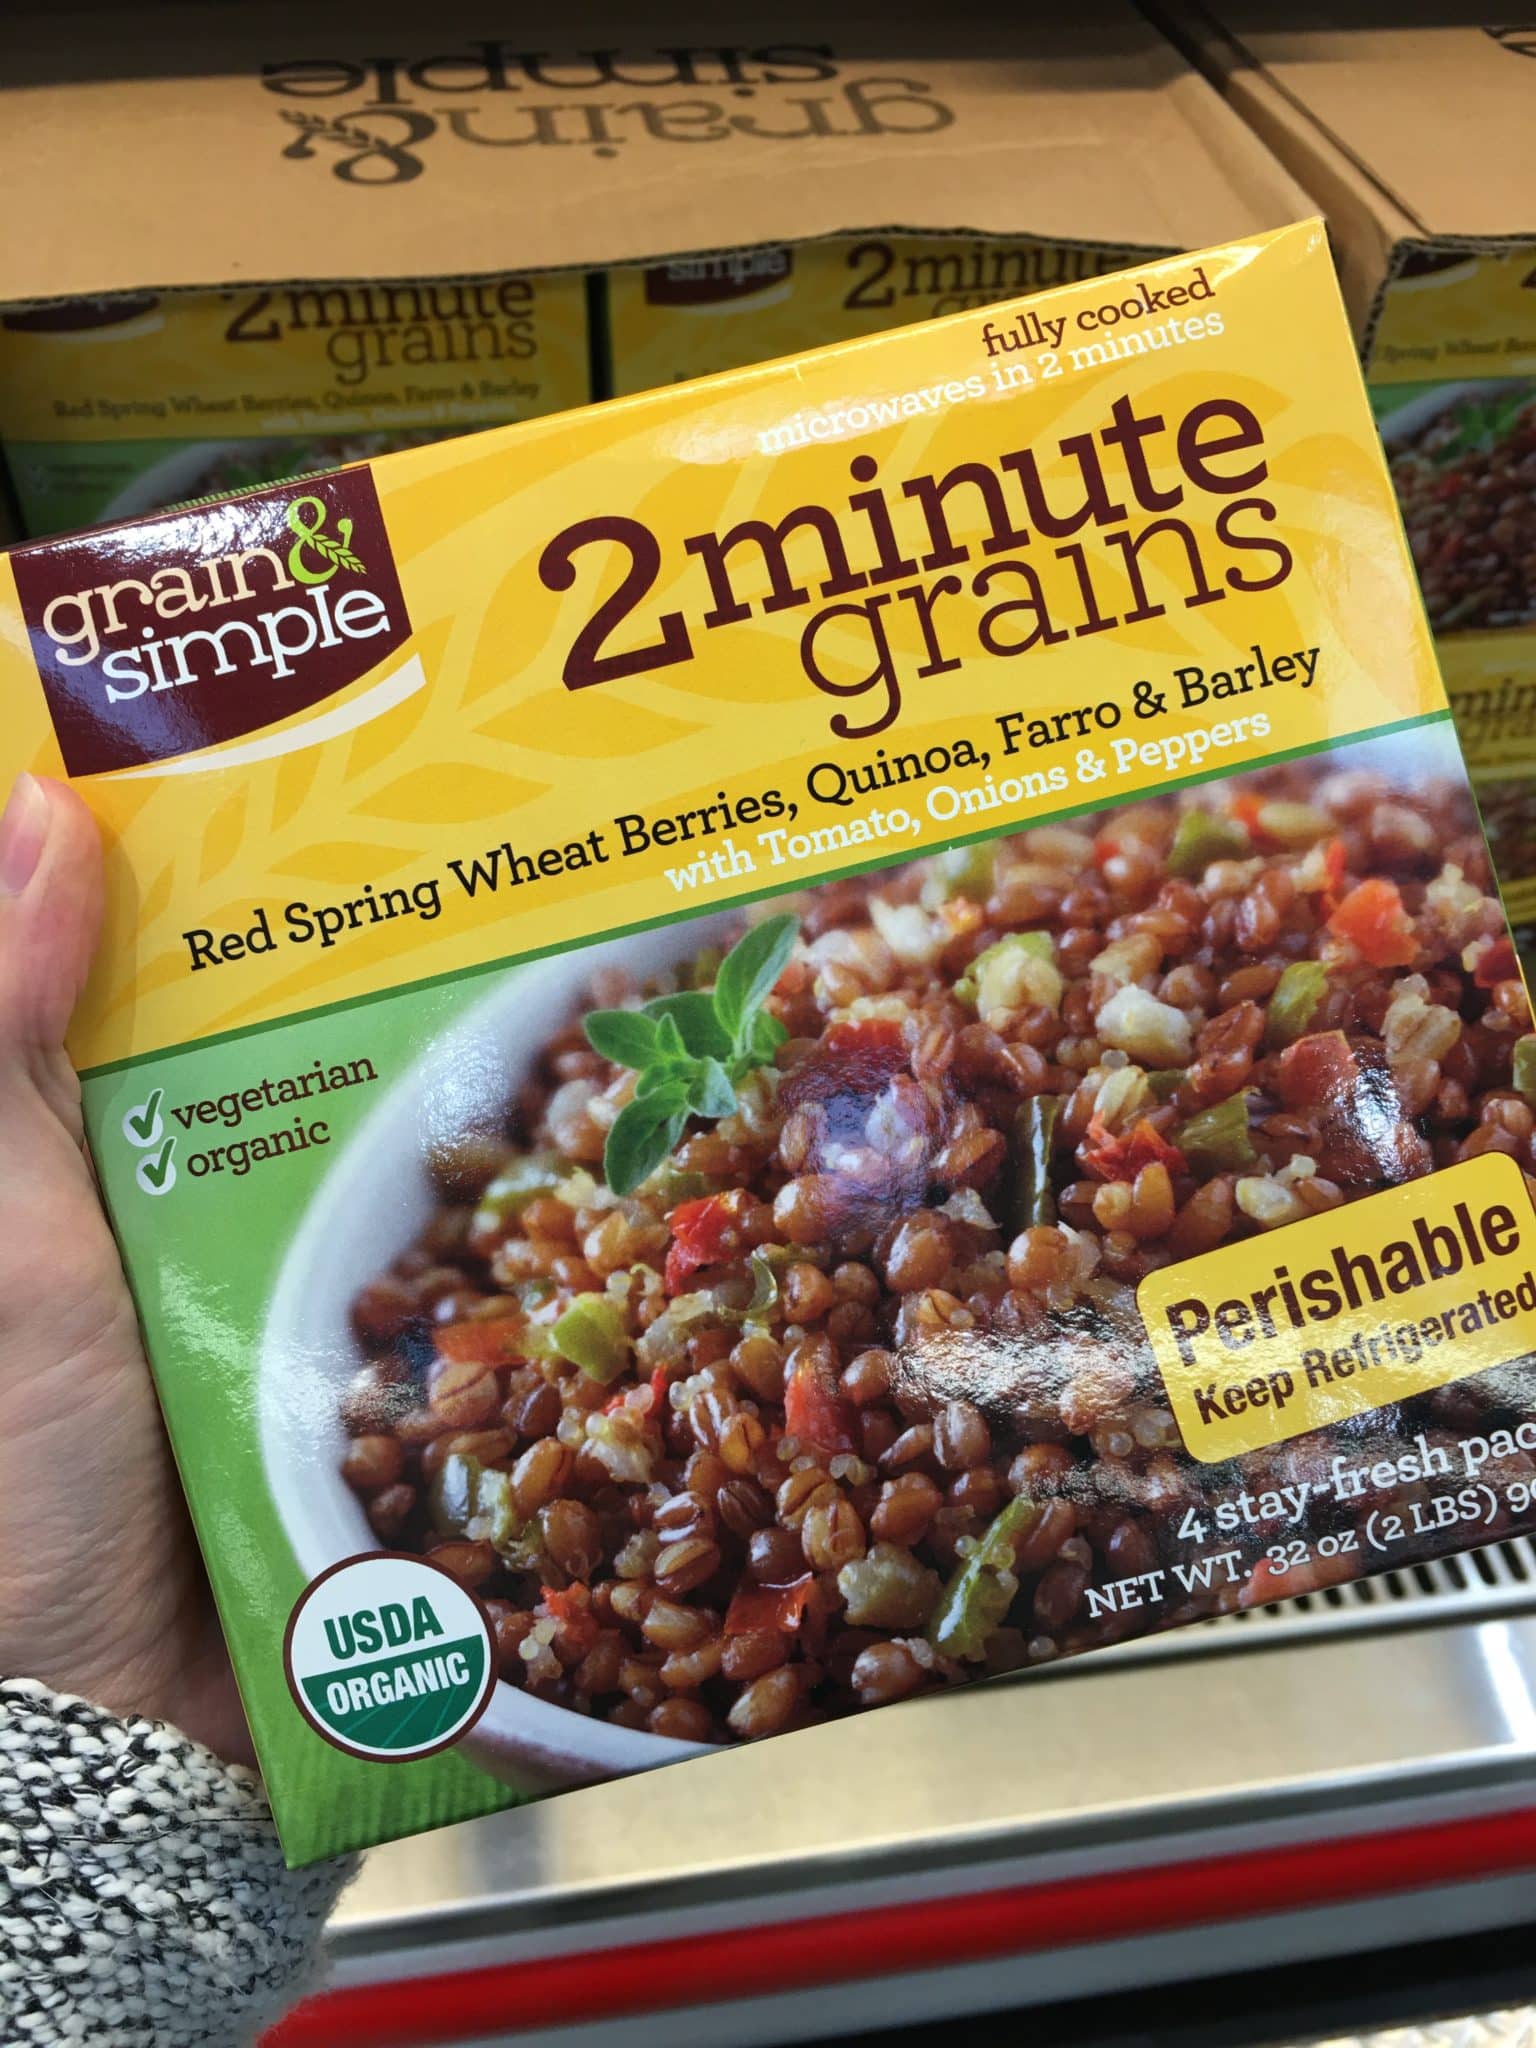 2-minute grains from Costco